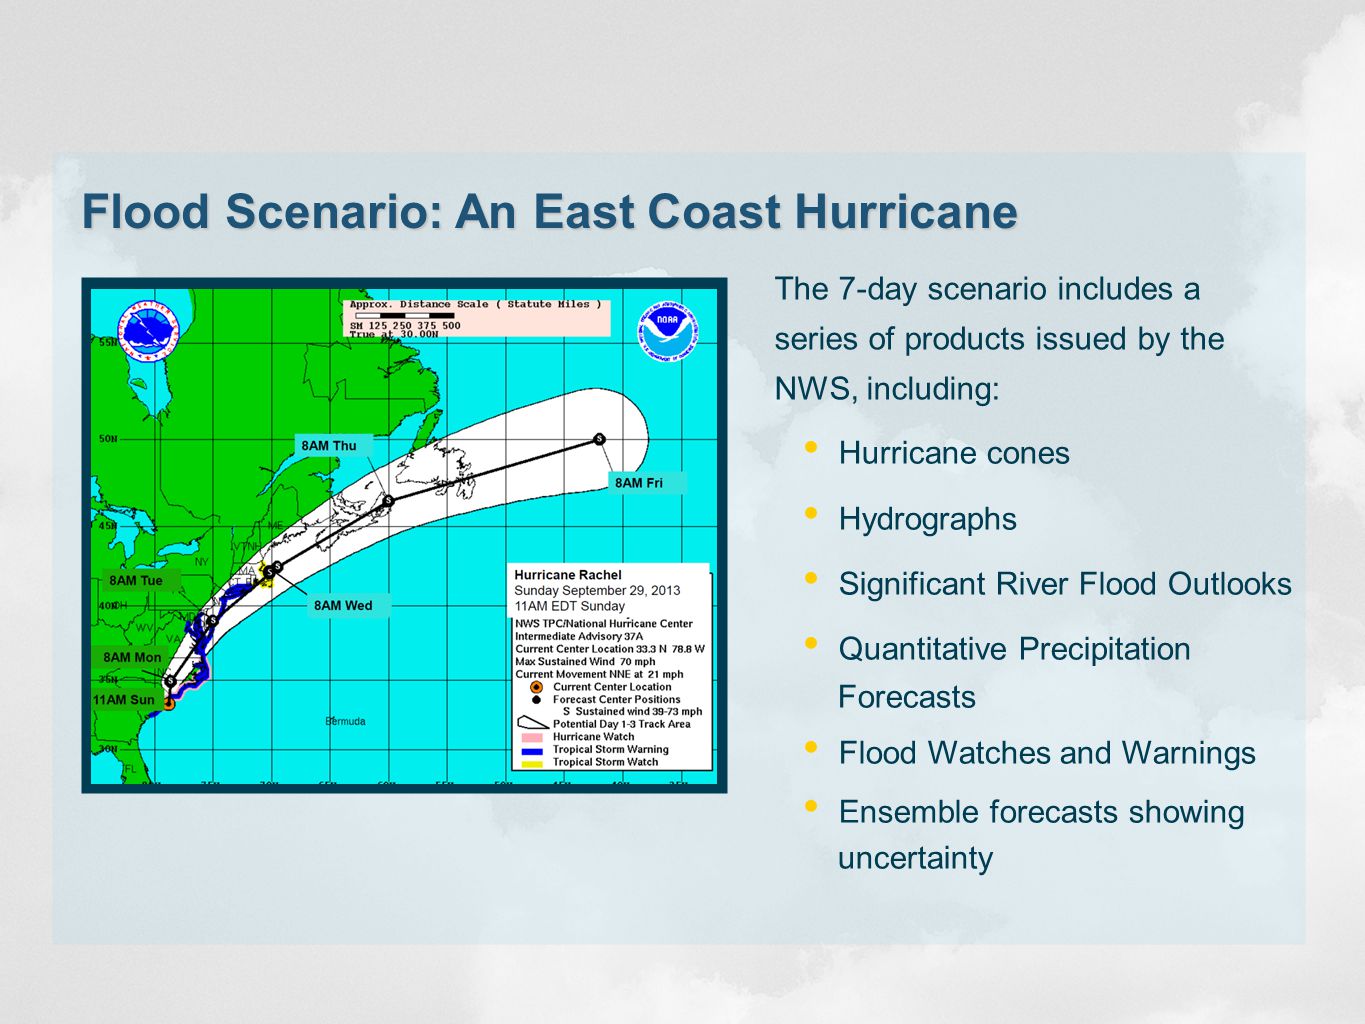 Flood Scenario: An East Coast Hurricane The 7-day scenario includes a series of products issued by the NWS, including: Hurricane cones Hydrographs Significant River Flood Outlooks Quantitative Precipitation Forecasts Flood Watches and Warnings Ensemble forecasts showing uncertainty